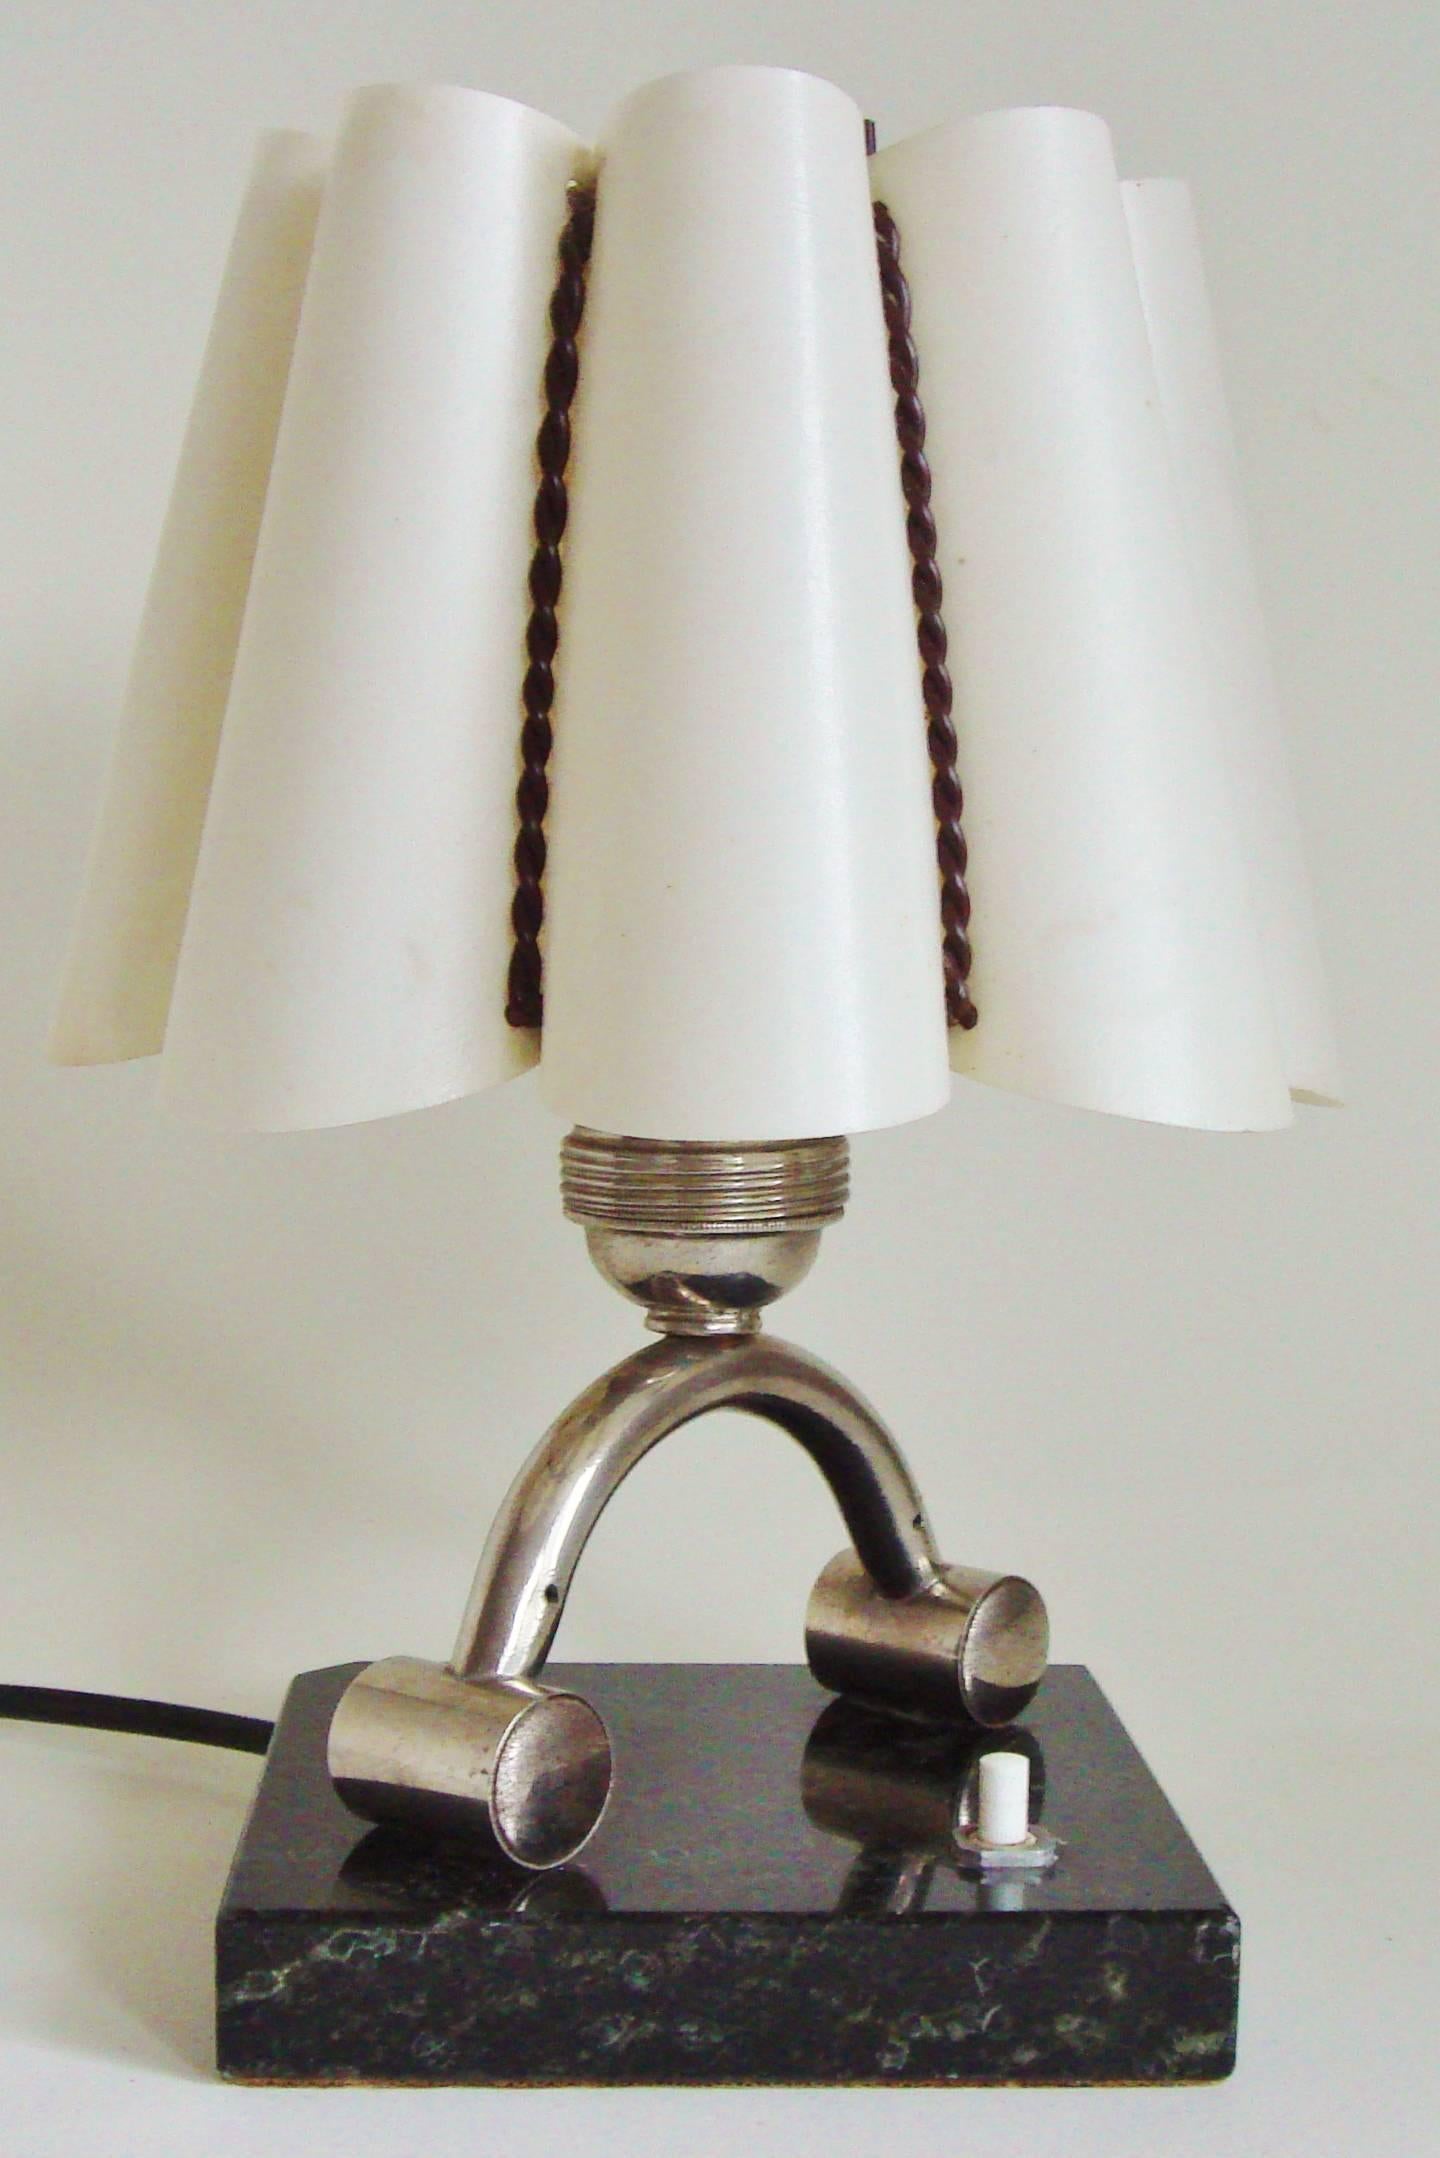 Mid-20th Century Petite French Art Deco Chrome & Marble Accent Lamp with Gimped Fiber Glass Shade For Sale